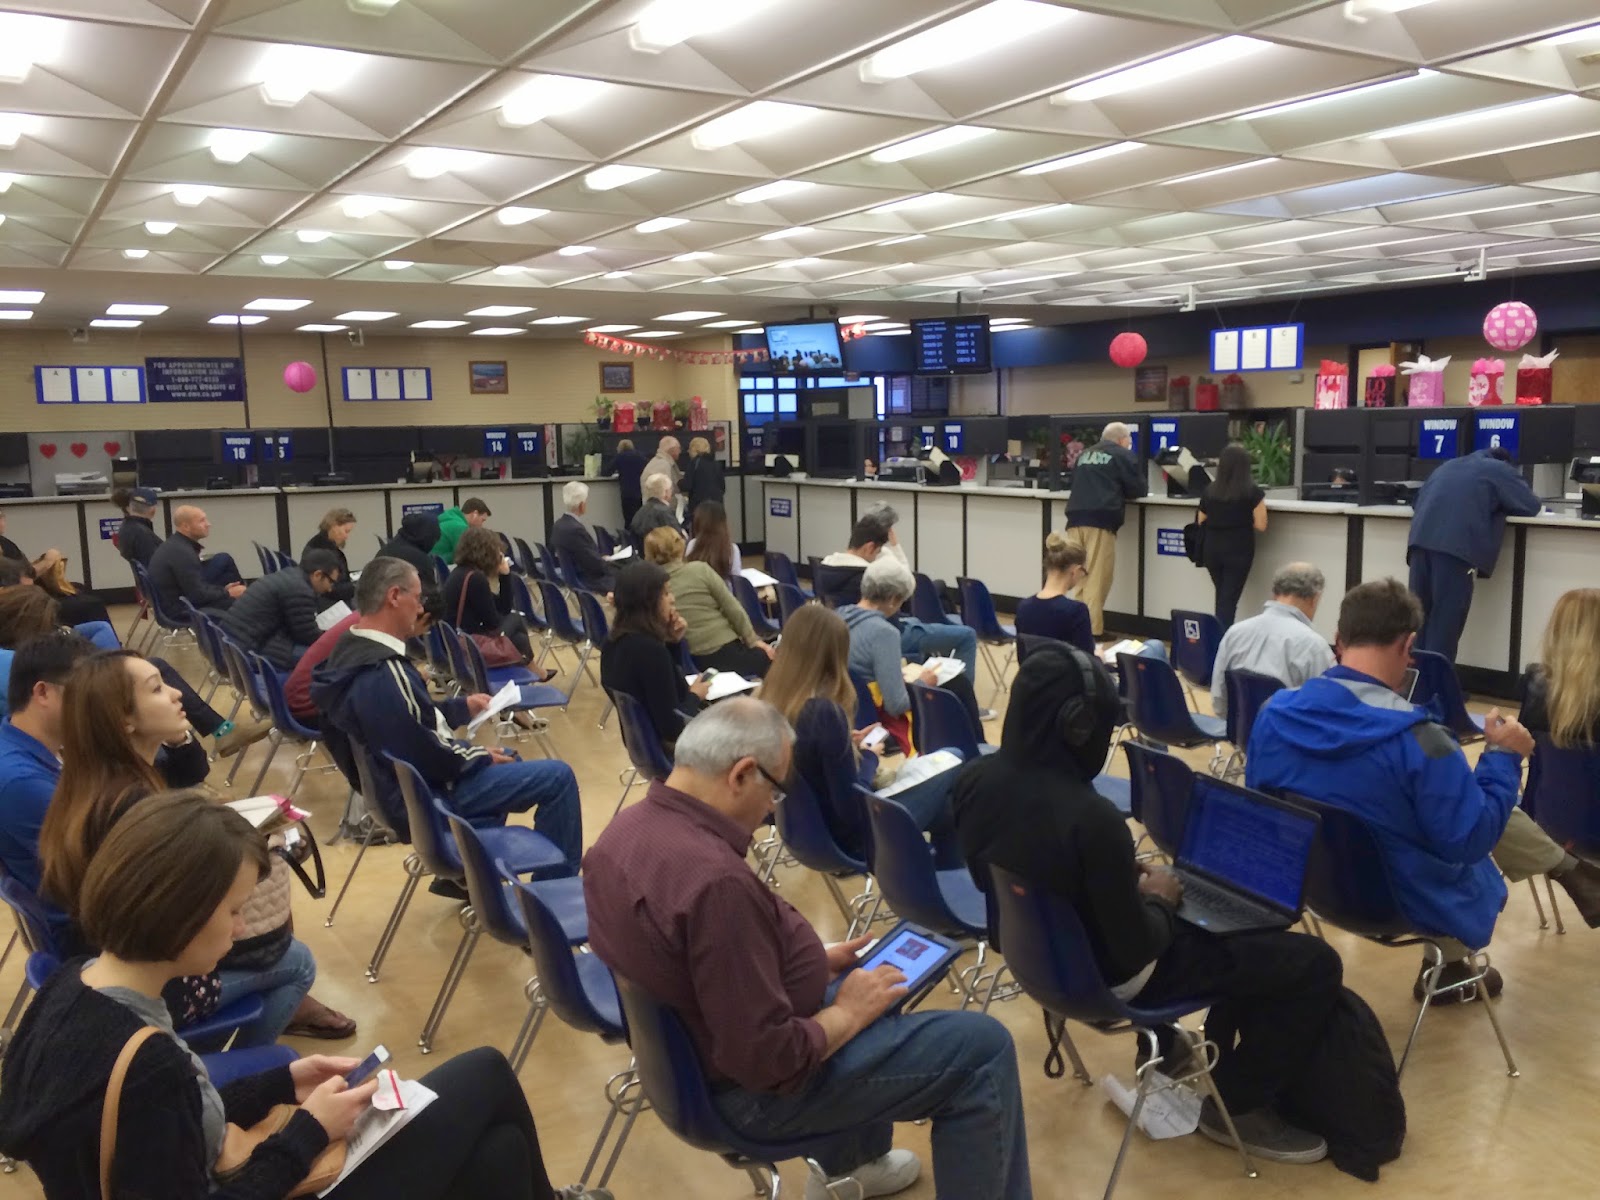 By Ken Levine: My day at the DMV